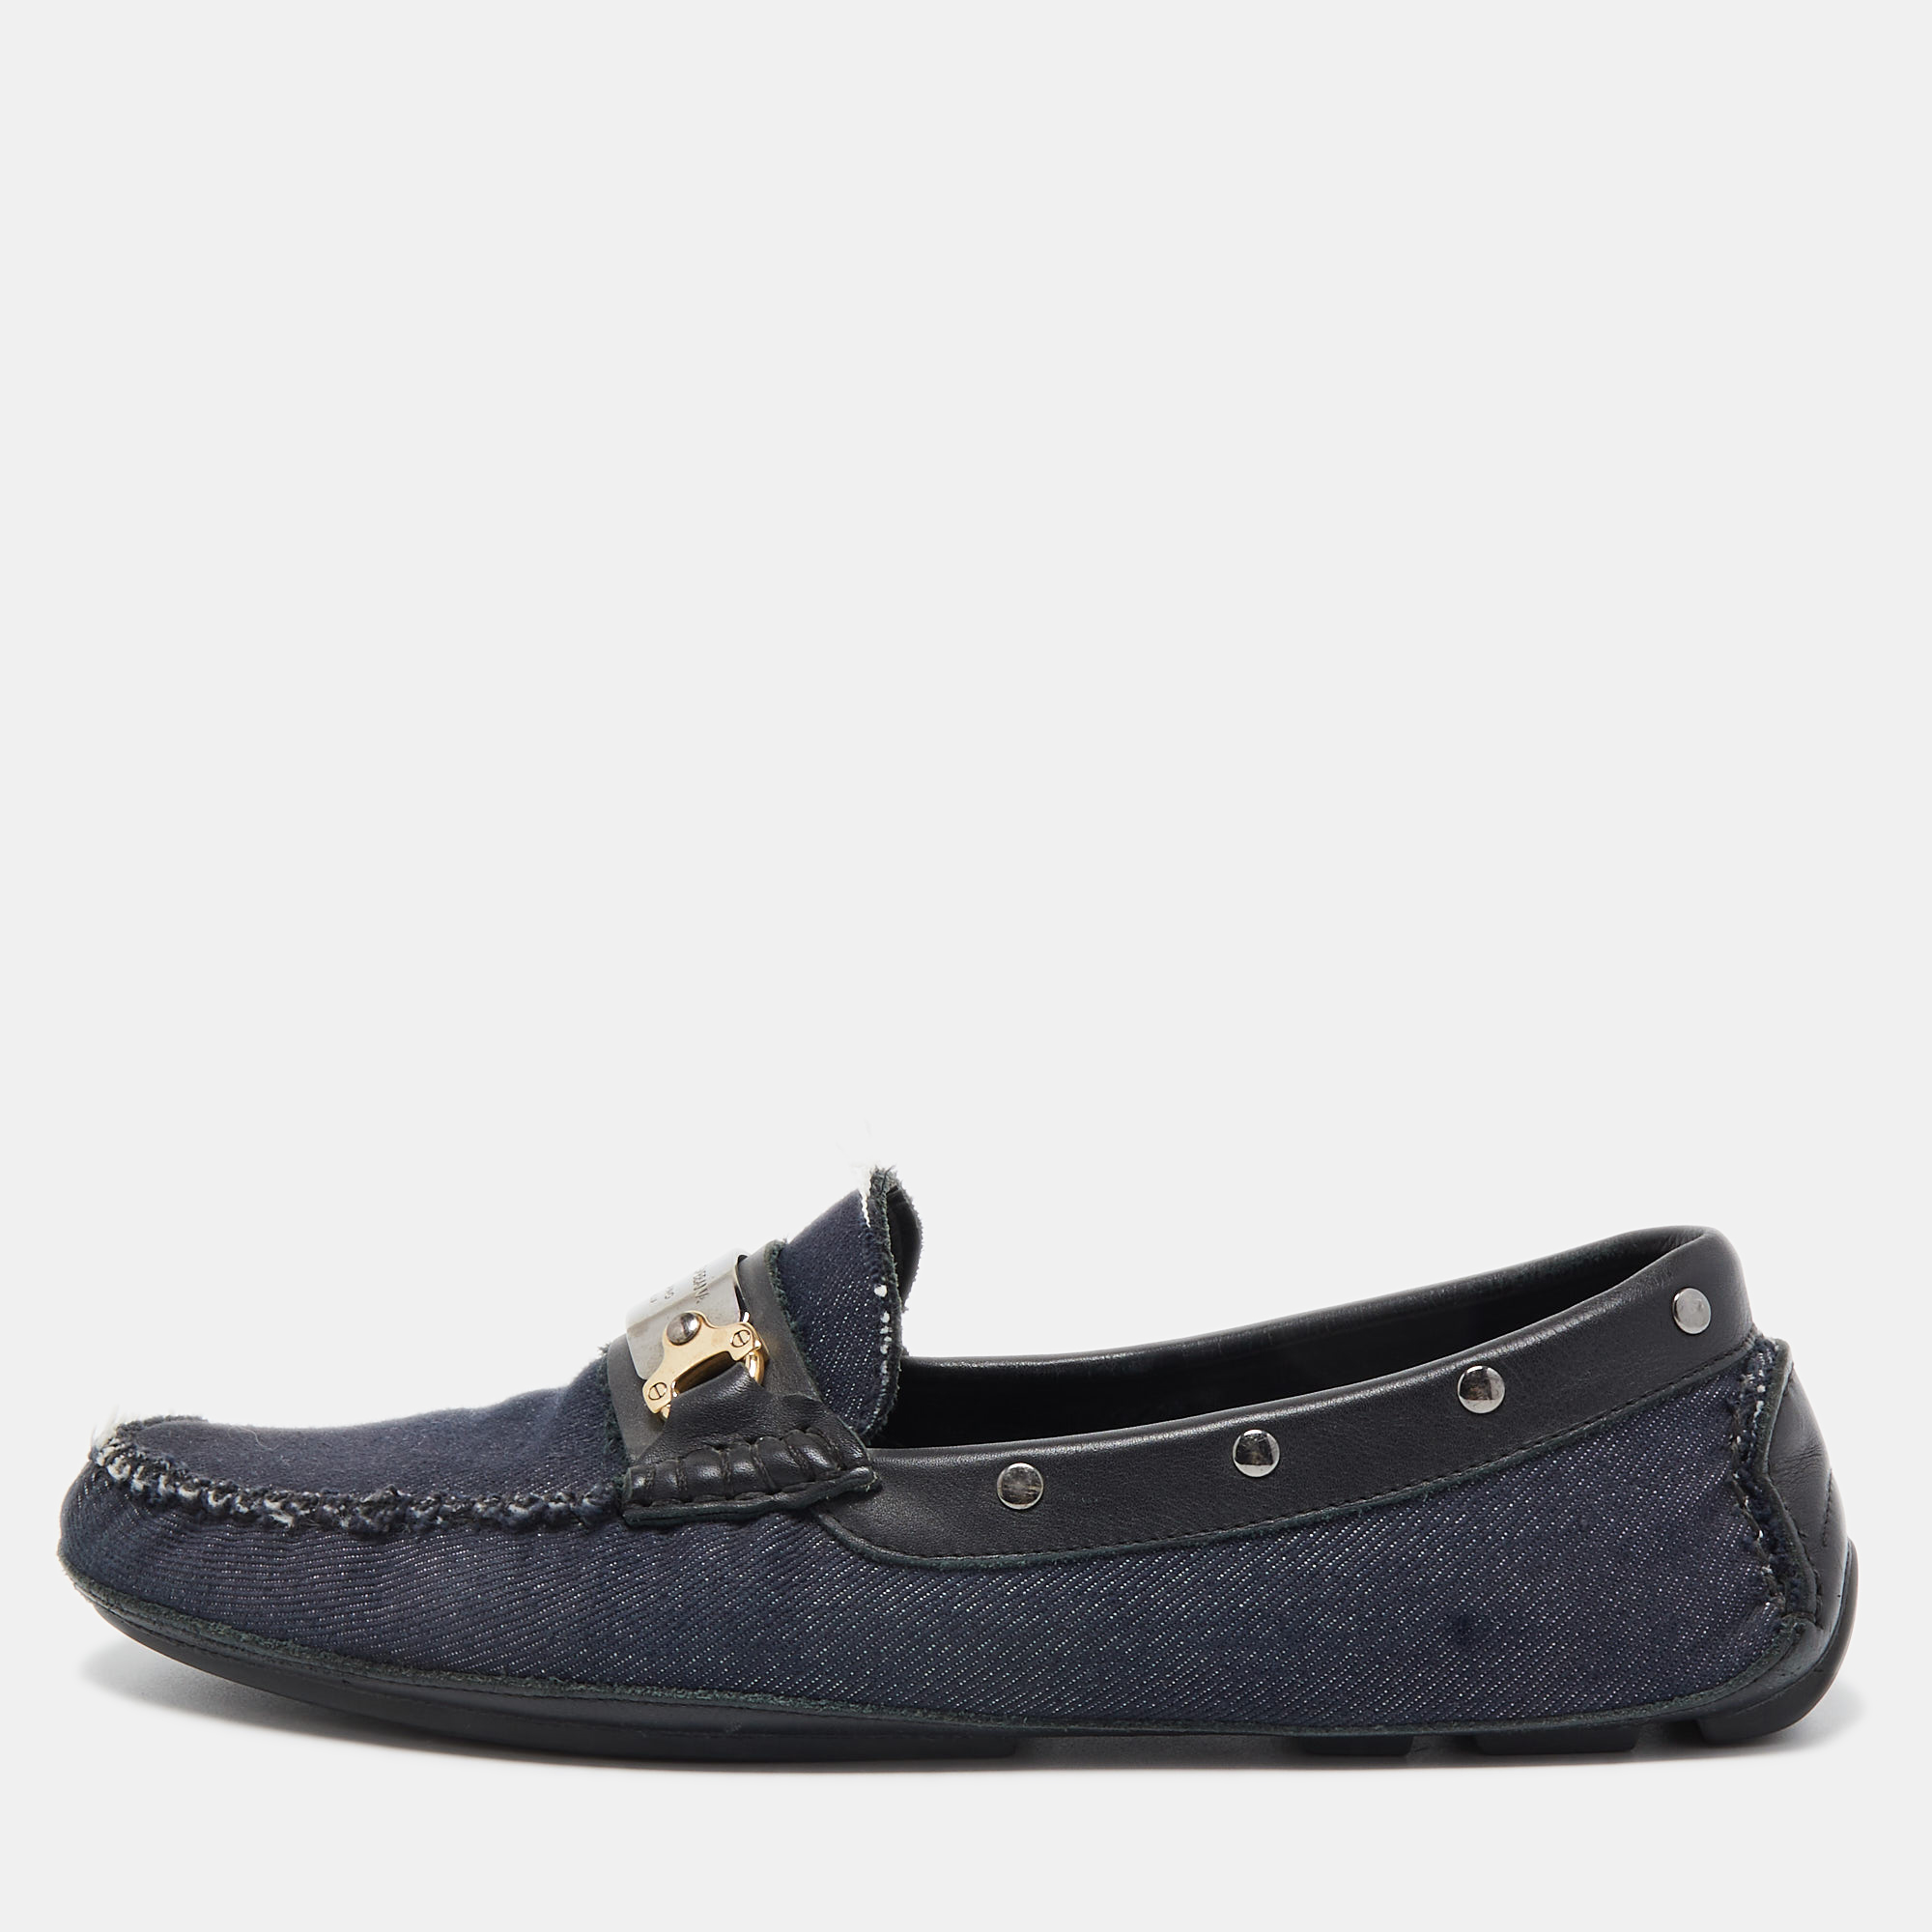 Pre-owned Dolce & Gabbana Navy Blue/black Denim And Studded Leather Loafers Size 40